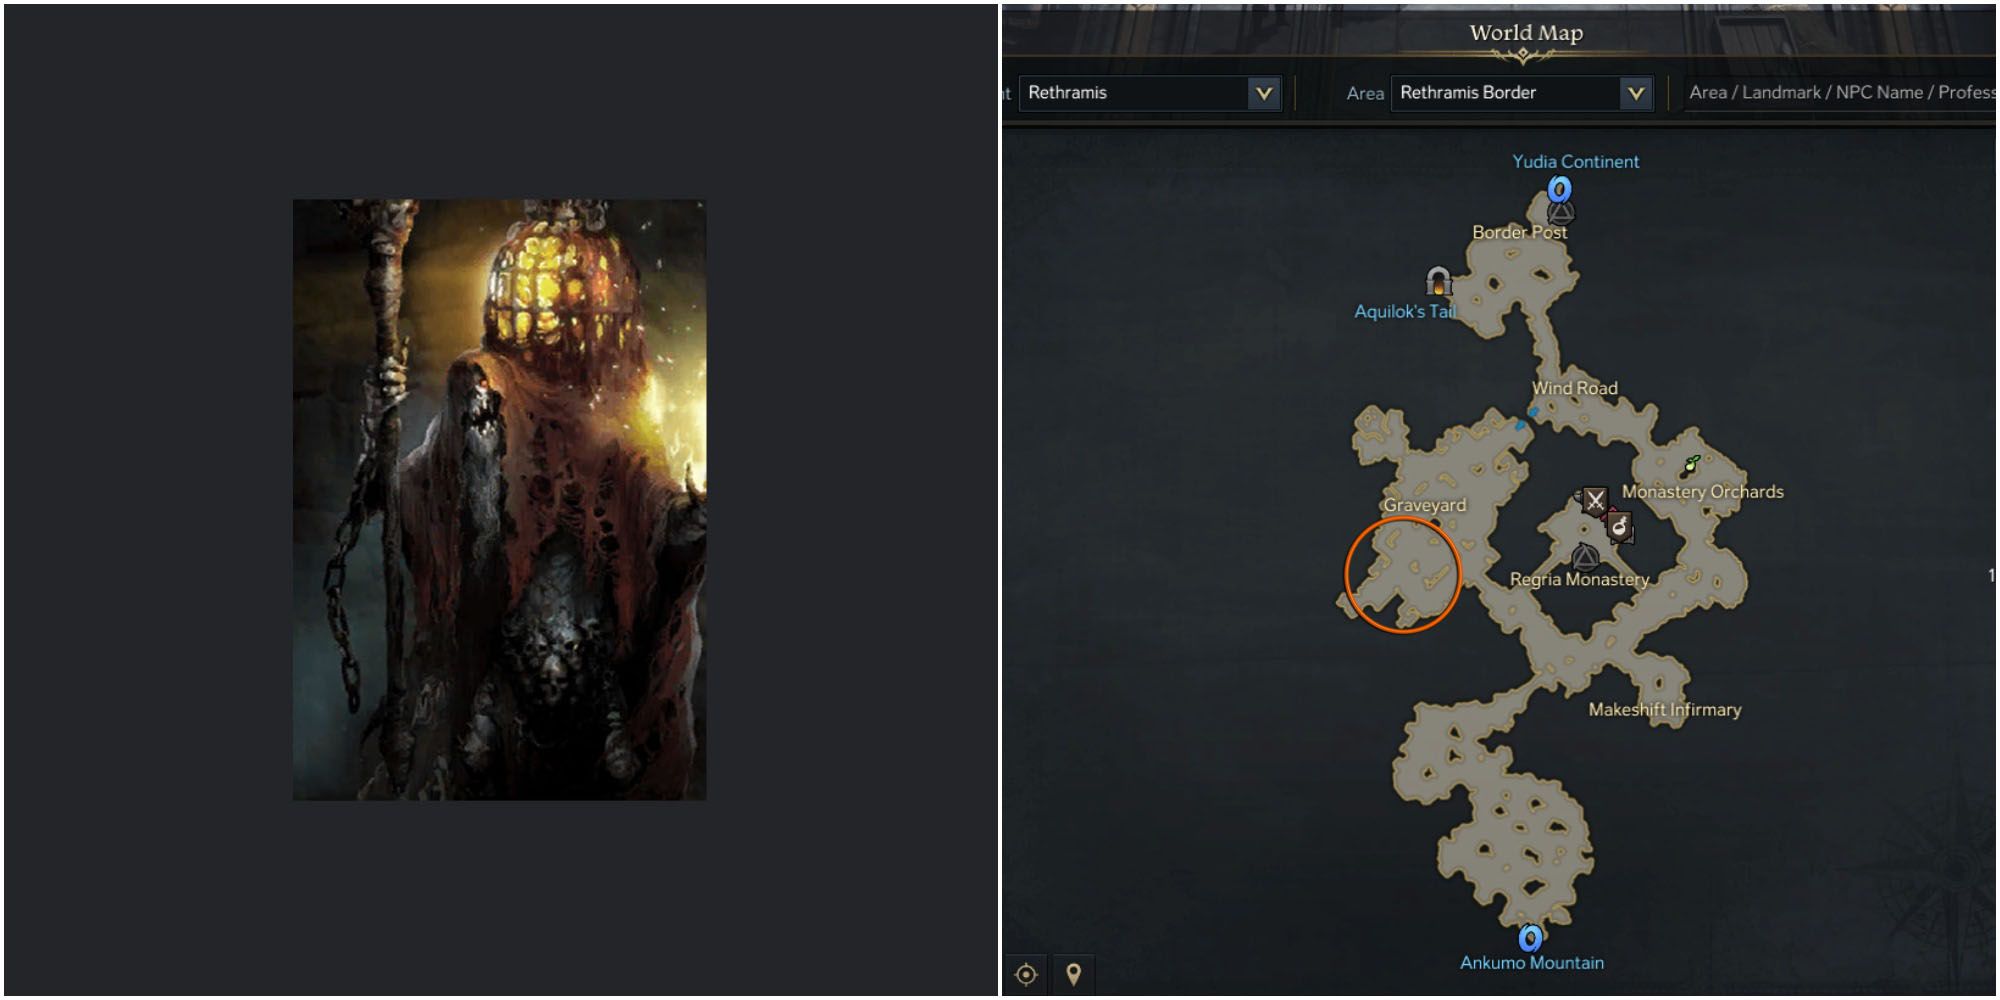 Split image of Rudric card and map of Rethramis Border with location circled